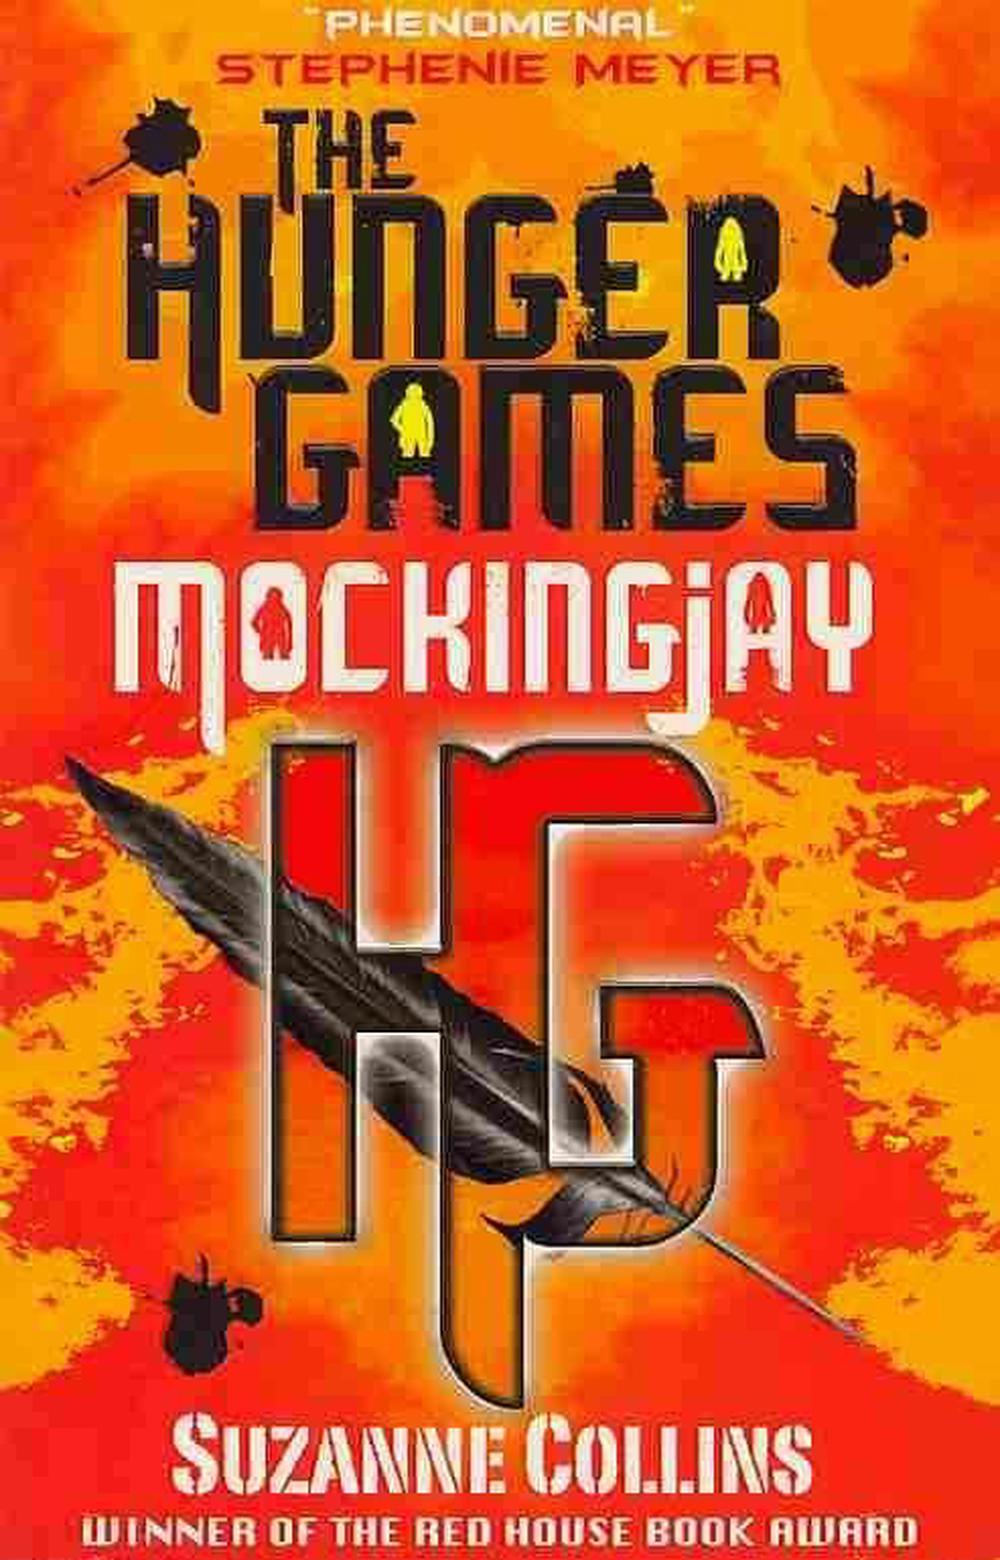 Mockingjay (the Final Book of the Hunger Games)